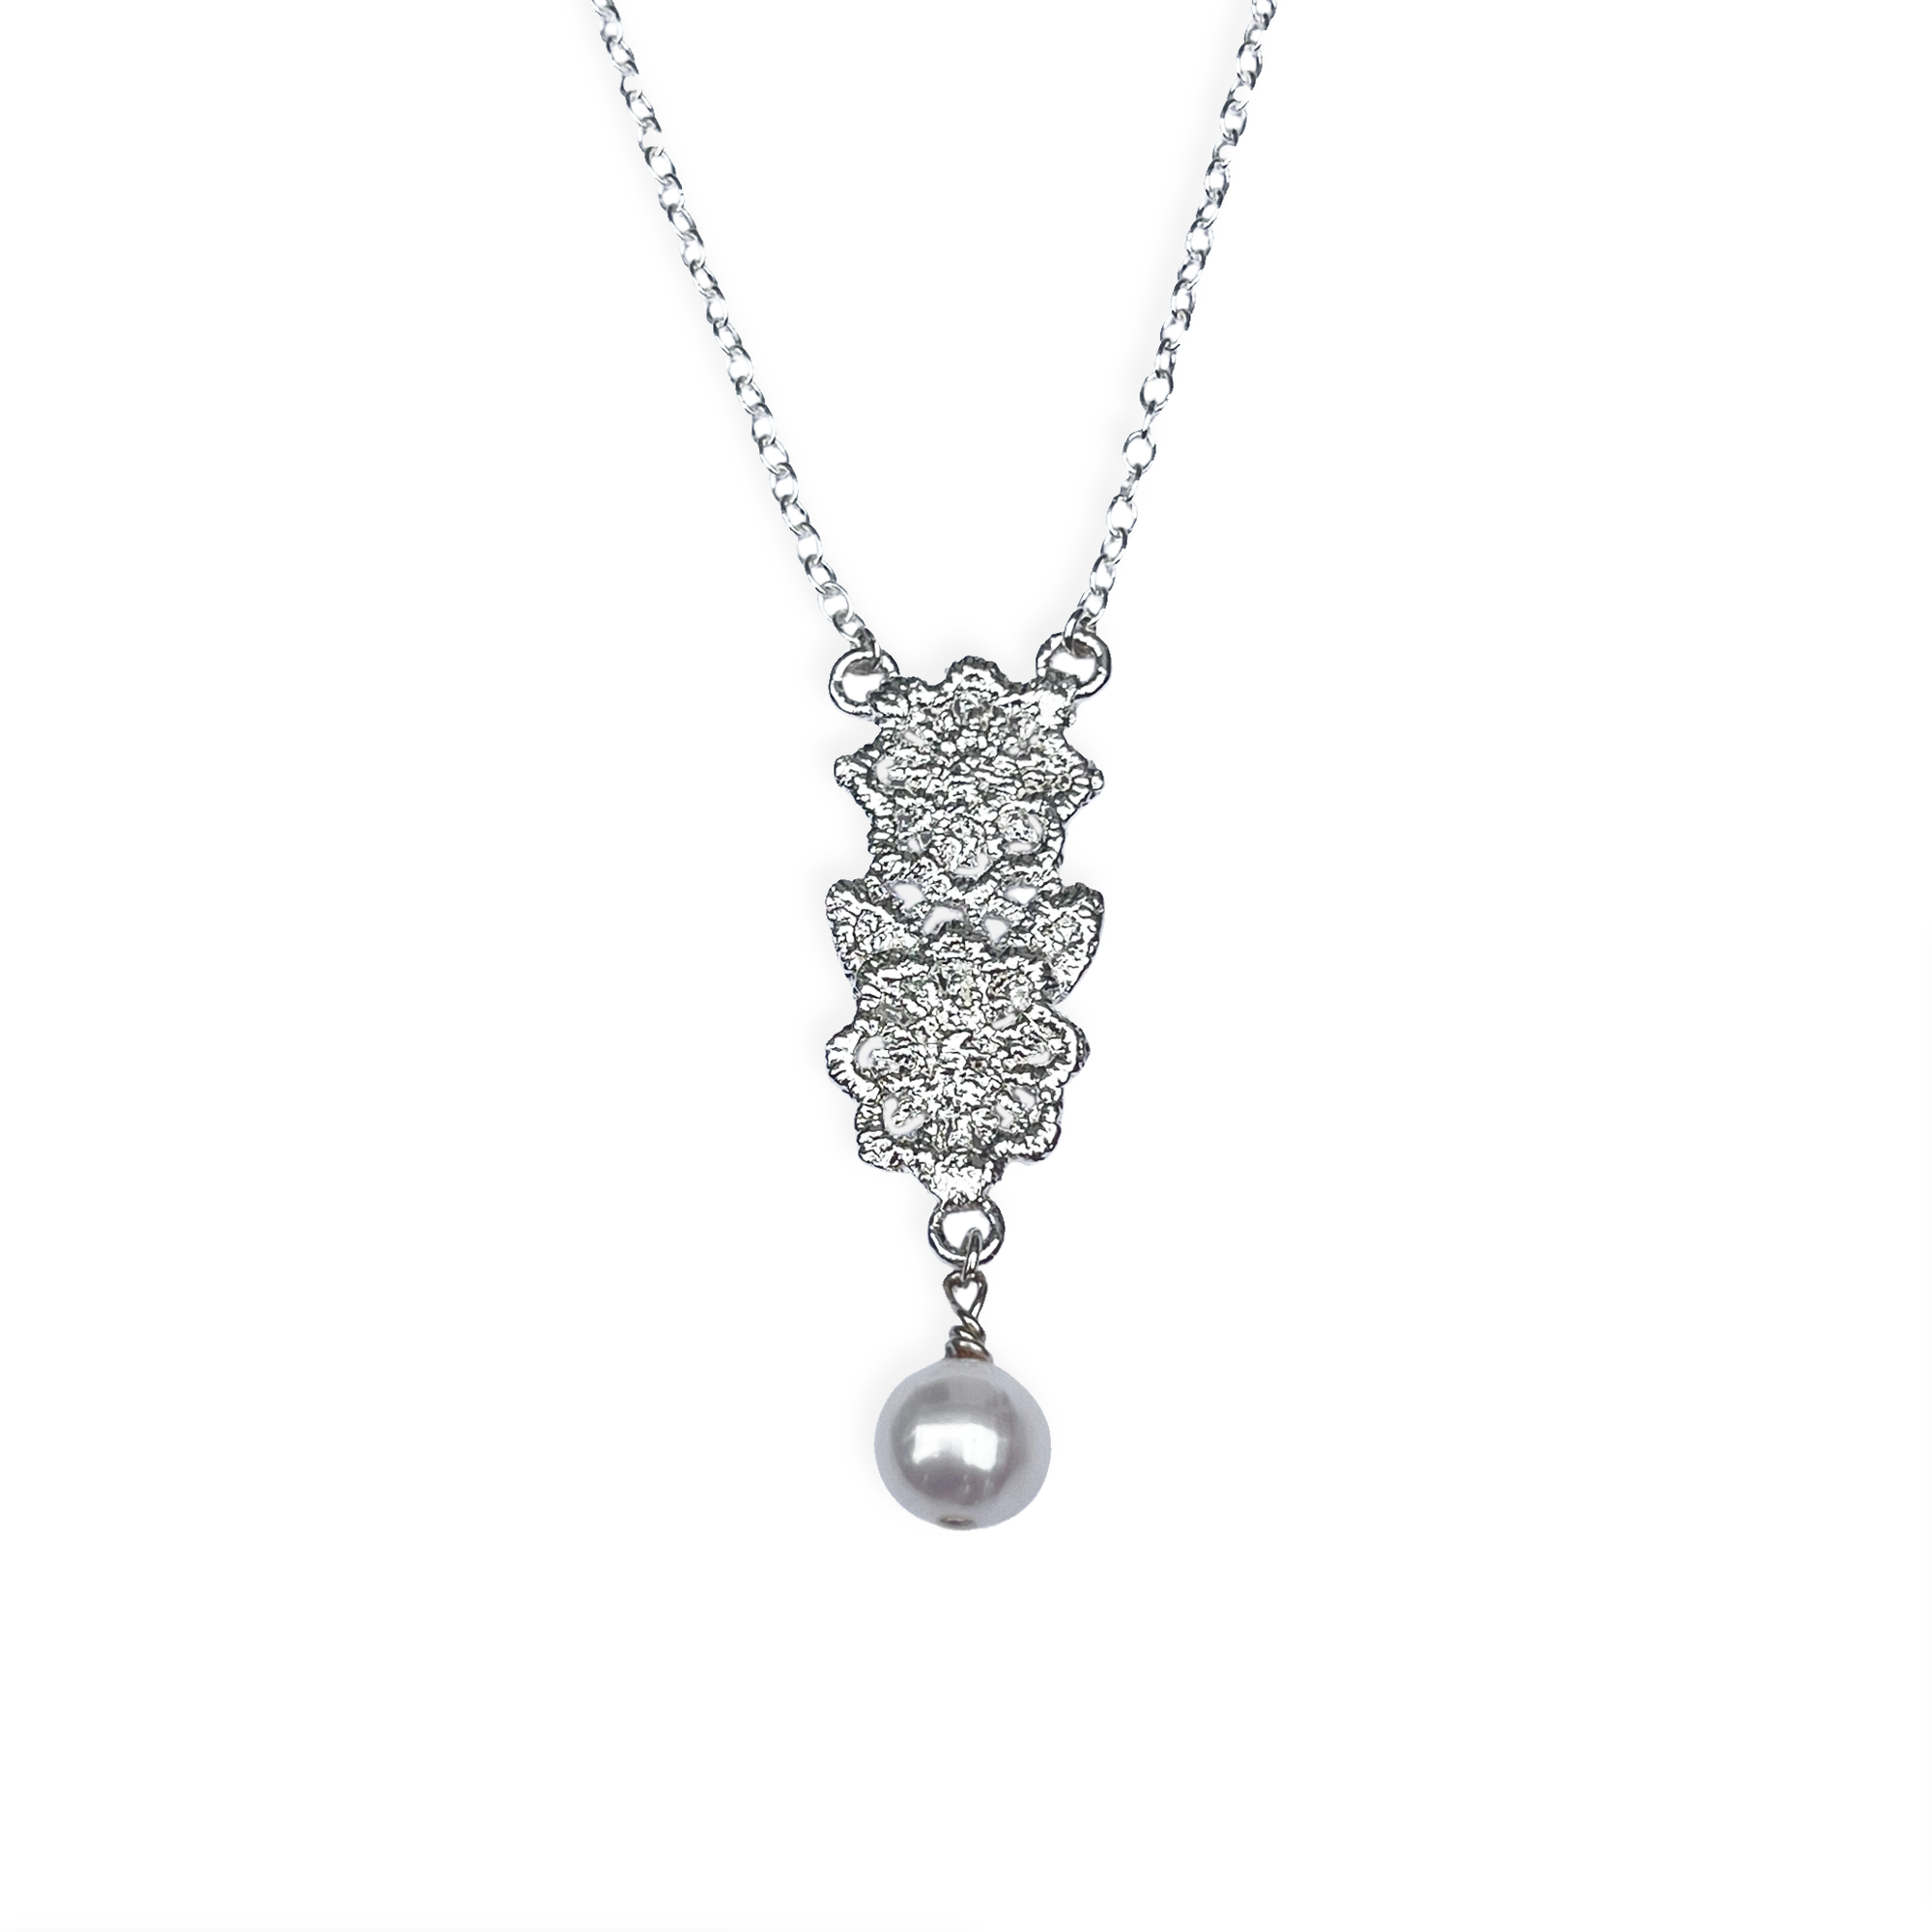 Pearl and Lace flower garland necklace in sterling silver.